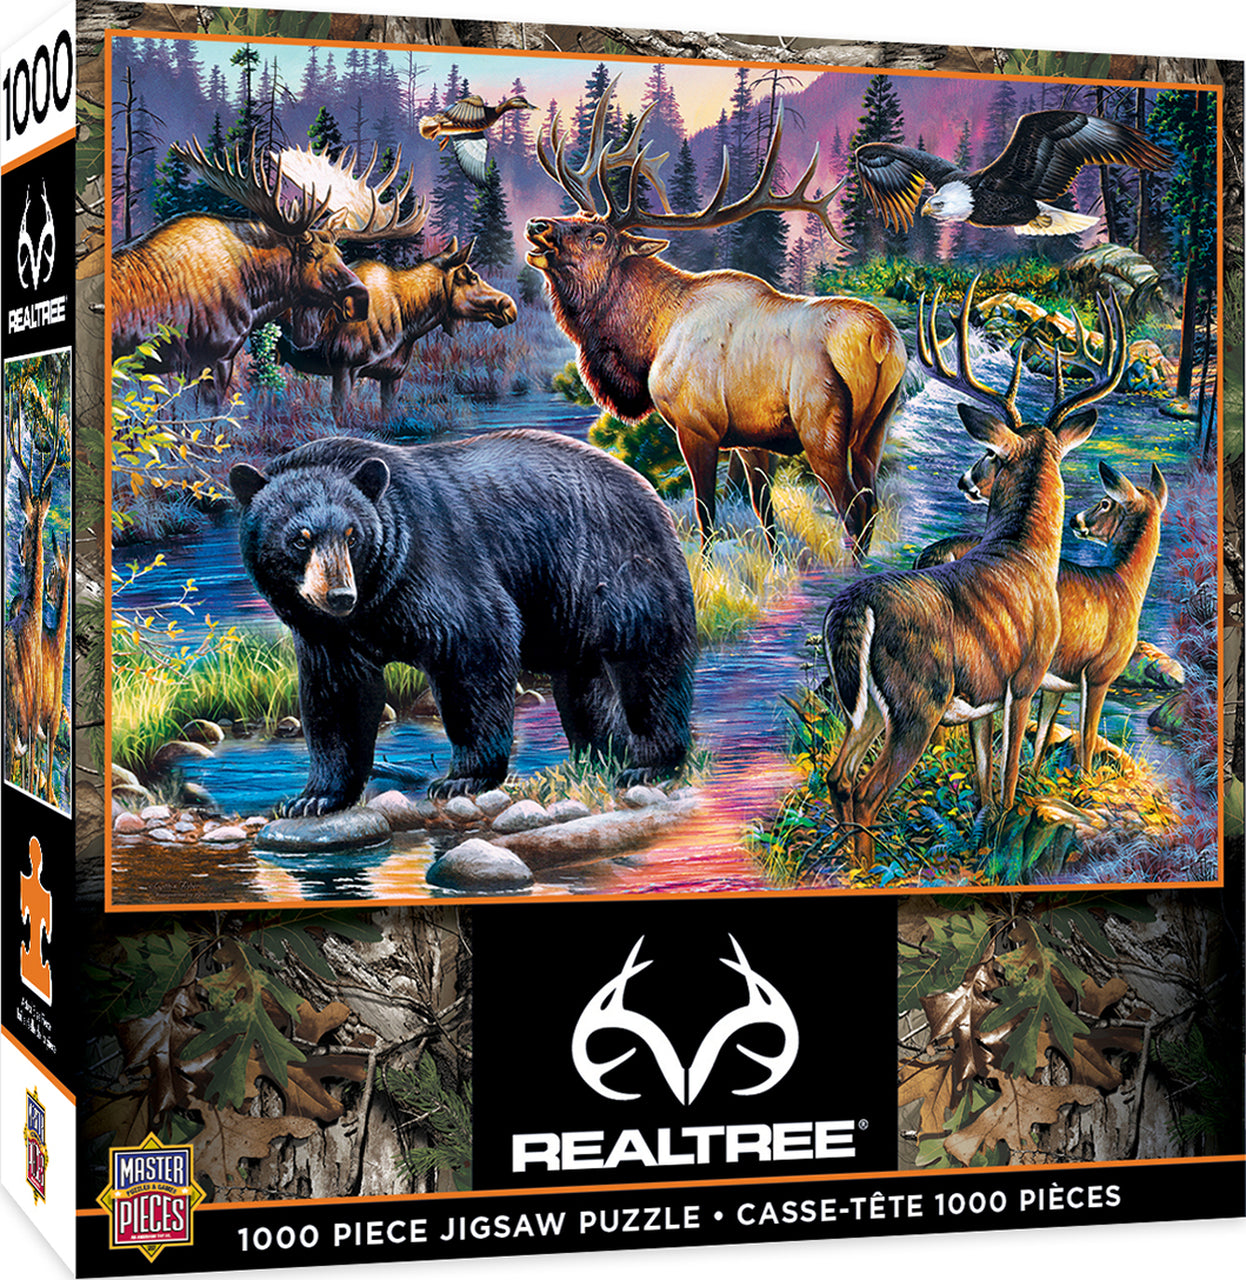 REALTREE - WILD LIVING 1000 PIECE JIGSAW PUZZLE